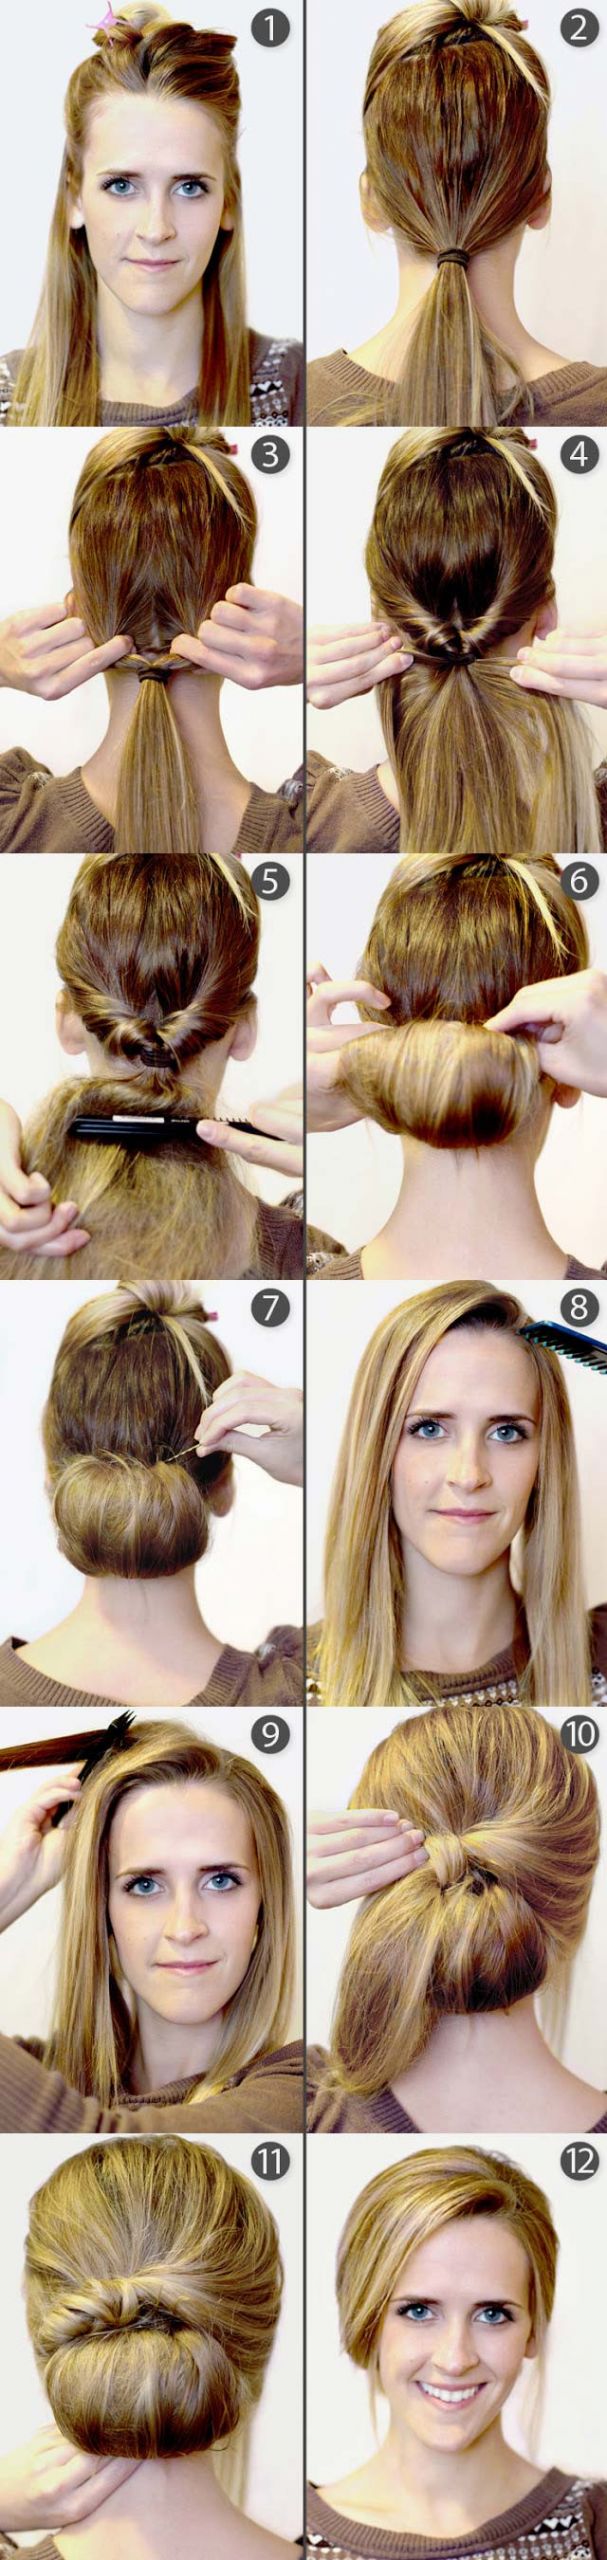 DIY Hairstyle For Long Hair
 DIY Your Step by Step for the Best Cute Hairstyles